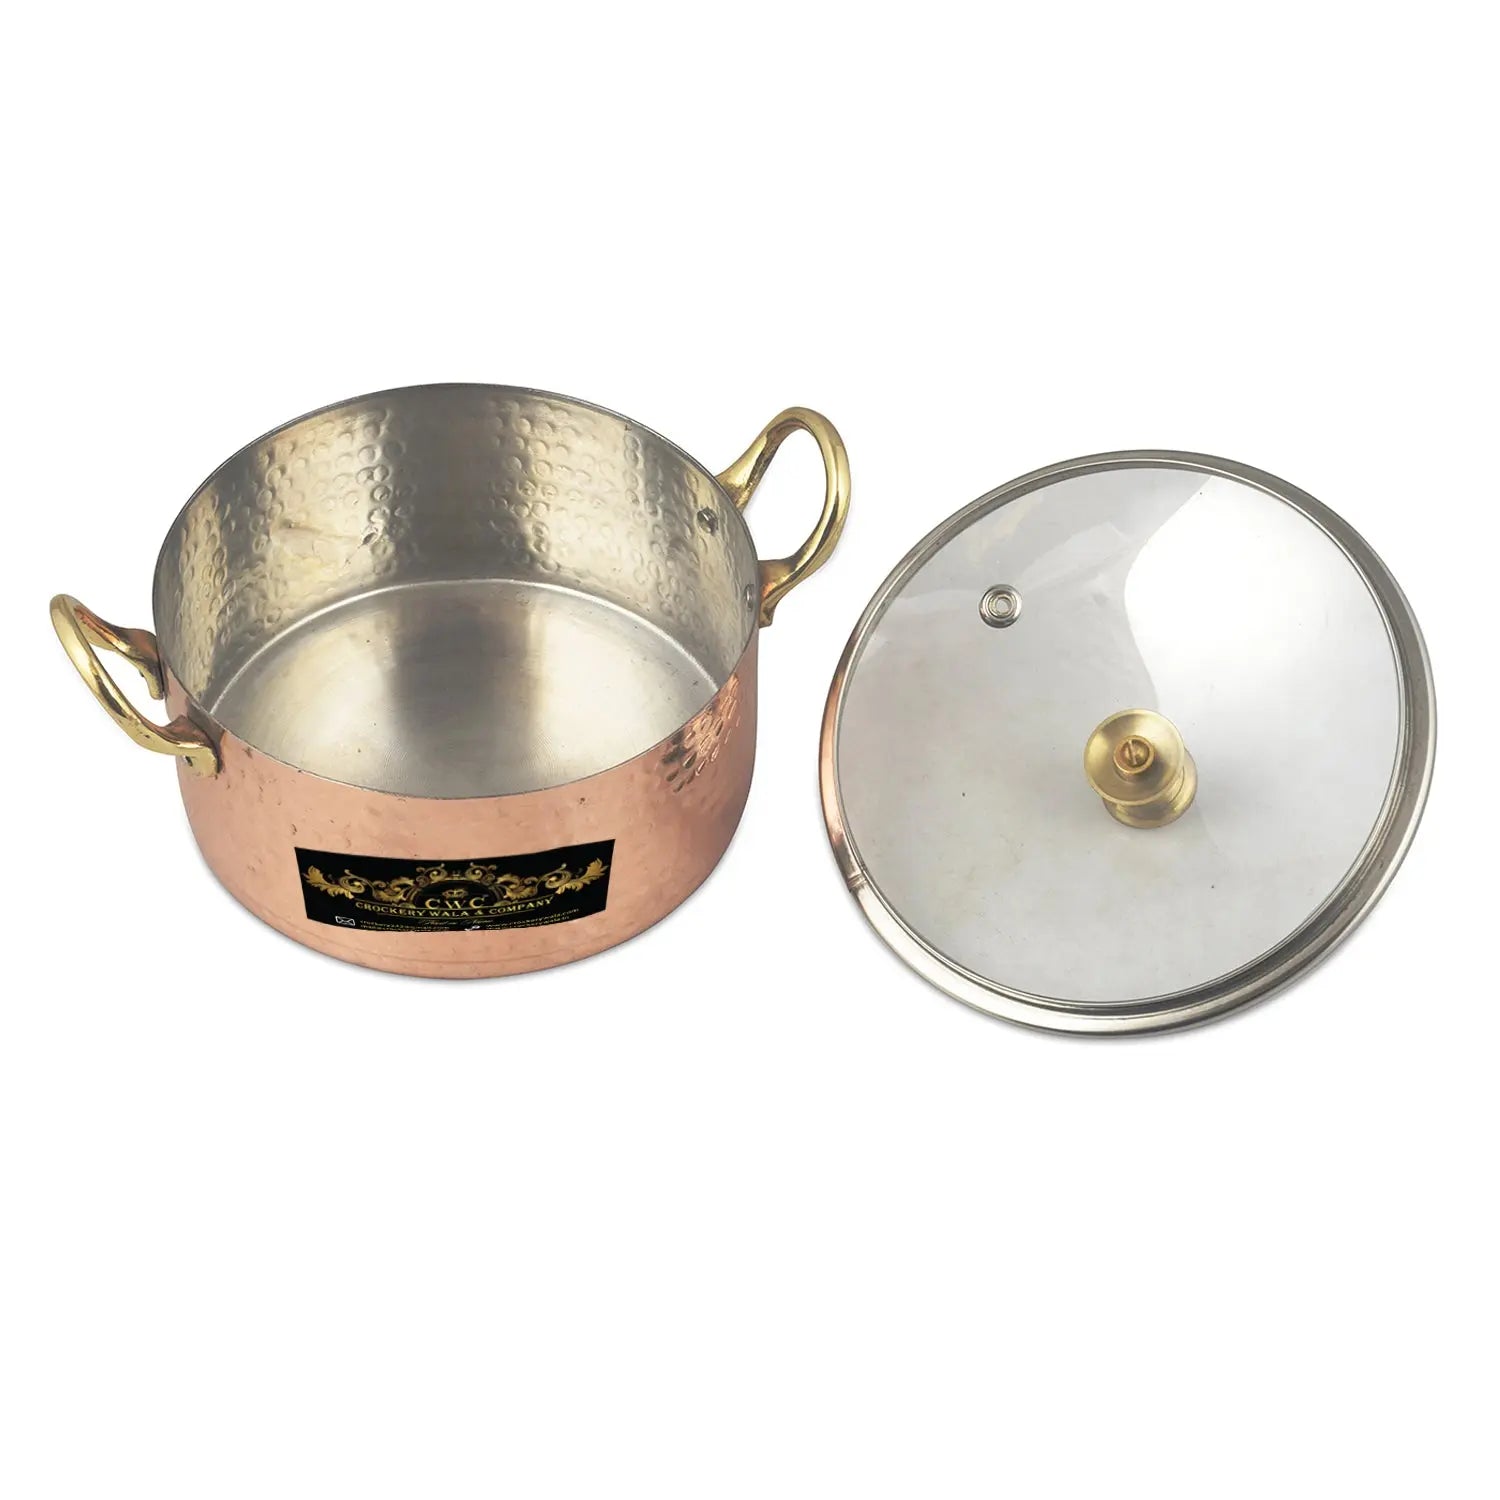 Pure Copper Kalai Saucepot With Glass Lid Hammered Design Saucepot For Cooking and Serving 700 ml